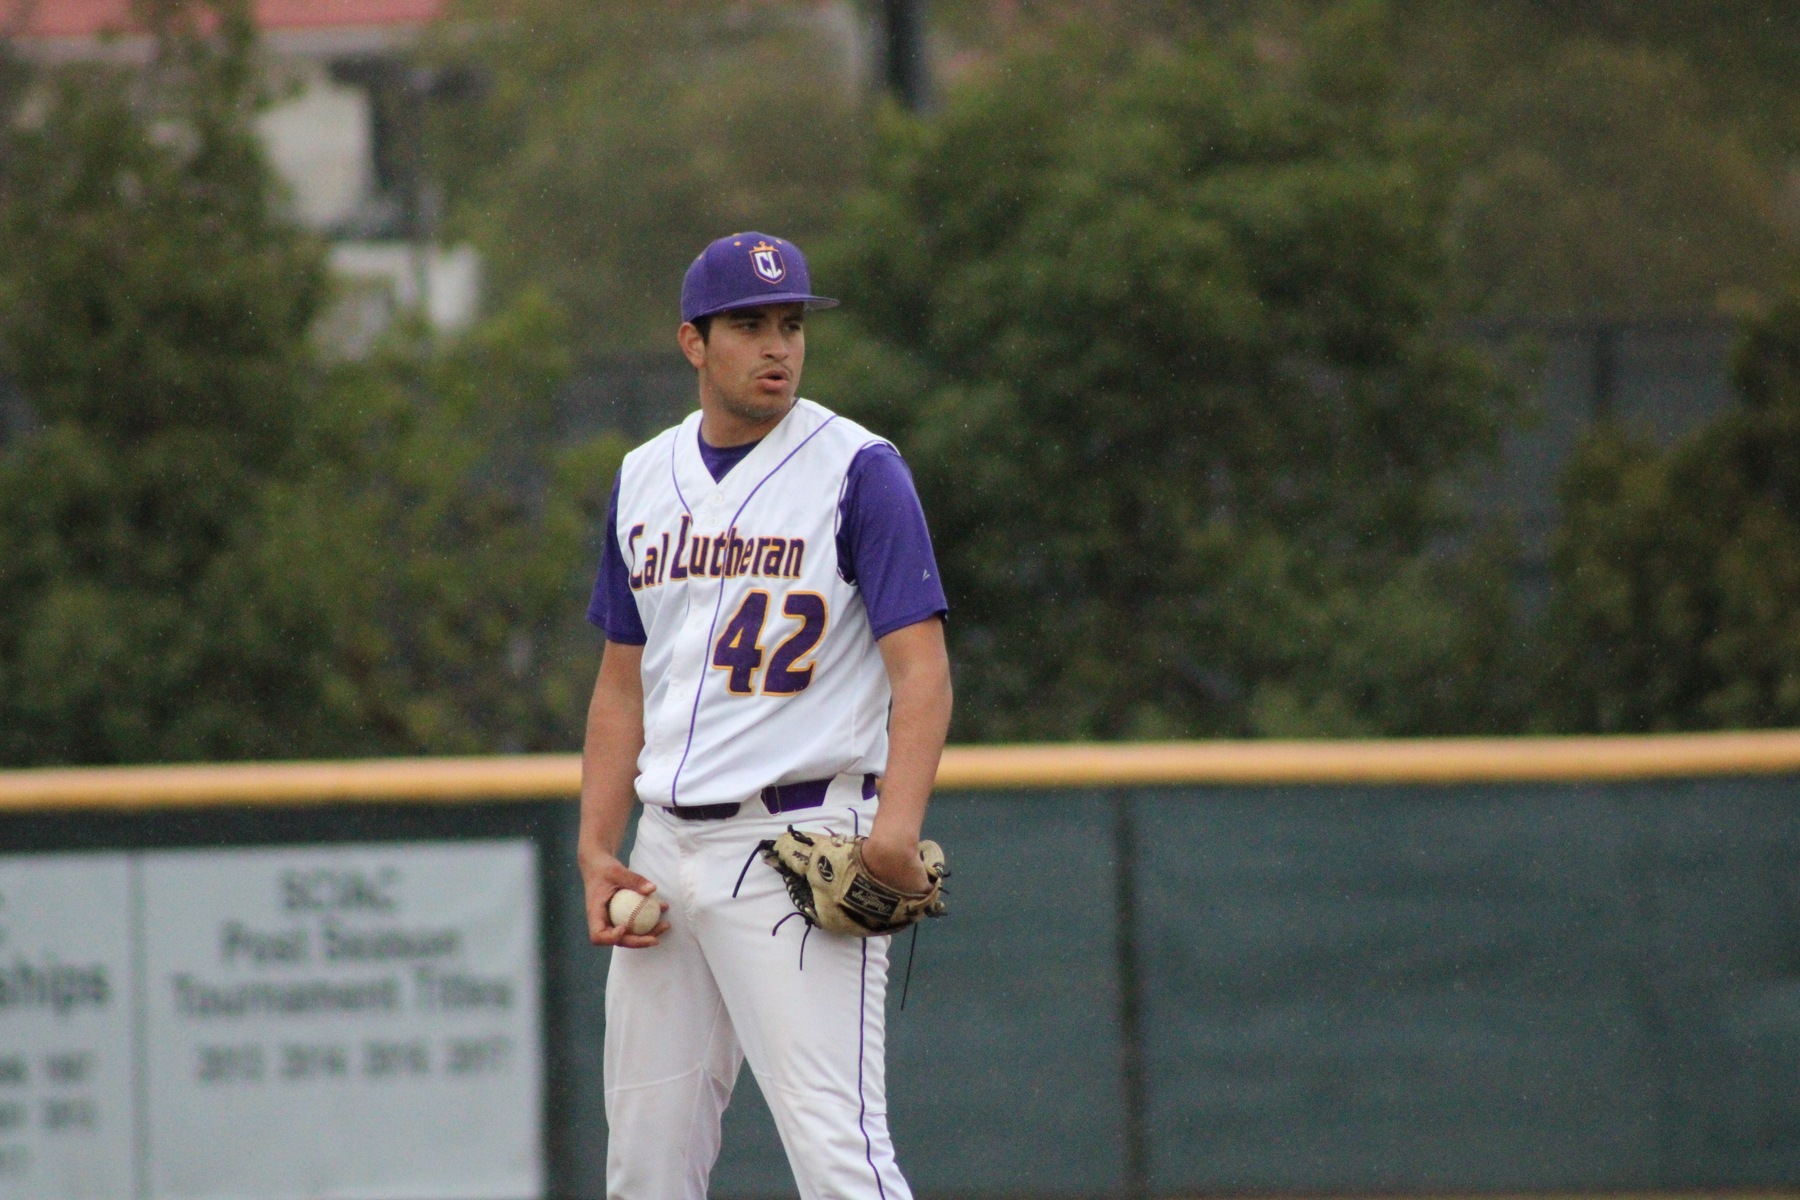 Michael Effatian earned the first win of his college career after a solid relief appearance out of the bullpen (Photo Credit: Mariah Zermeno)